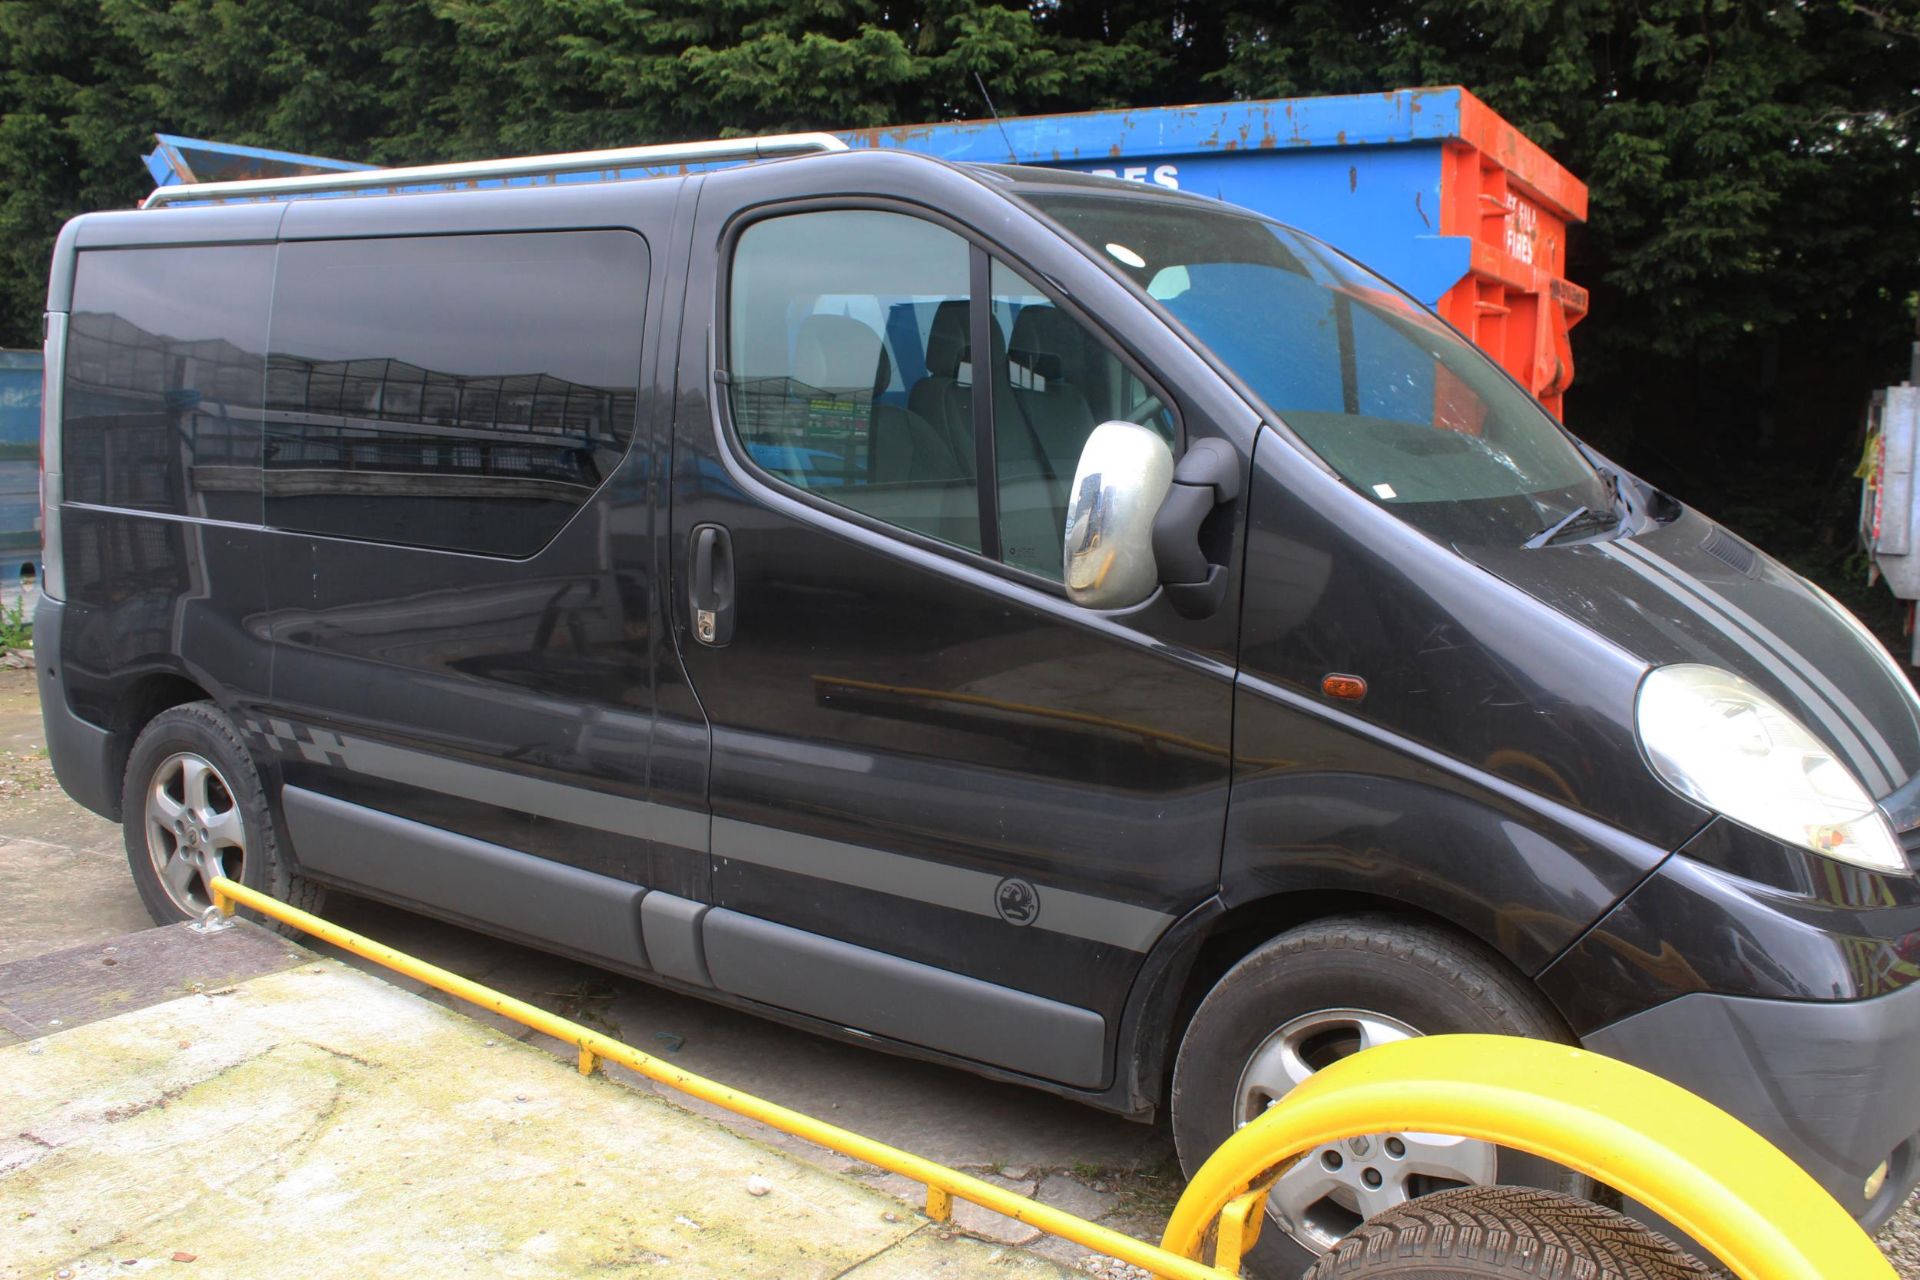 A BLACK 2007 VAUXHALL VIVARO VAN, WITH MANUAL TRANSMITION DIESEL ENGINE AND 171500 APPROXIMATE MILES - Image 3 of 3